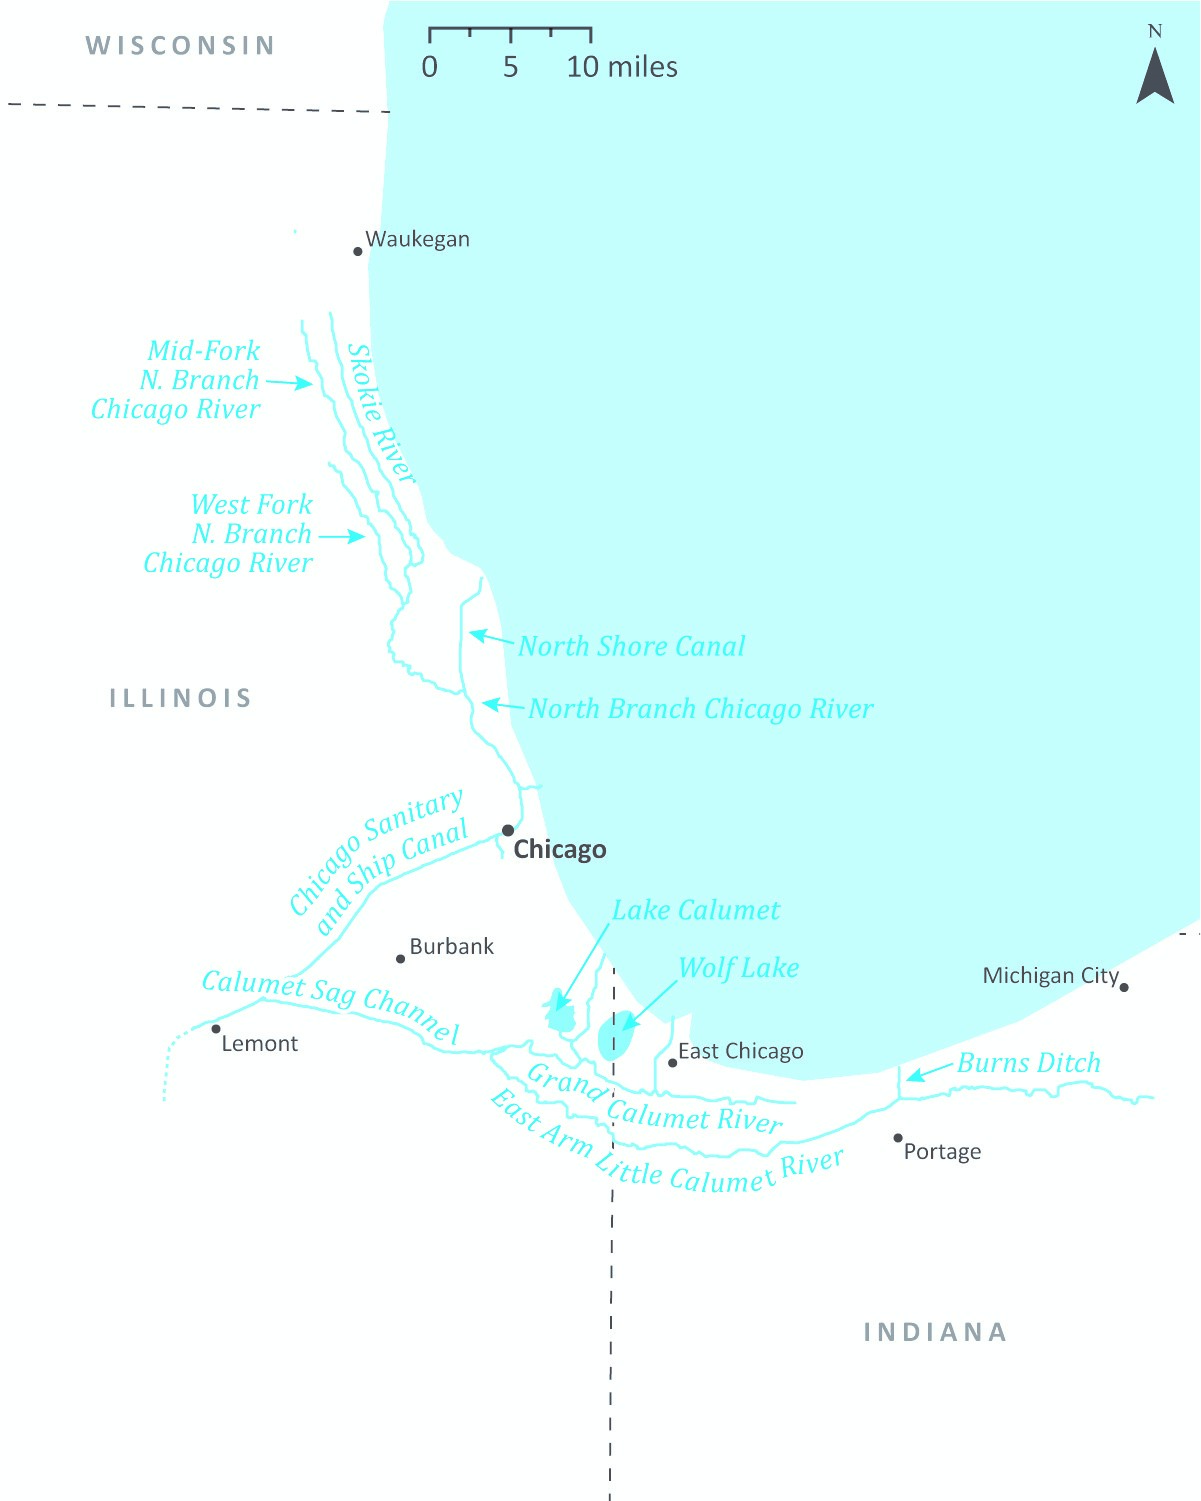 a map of the Chicago area and rivers near Lake Michigan